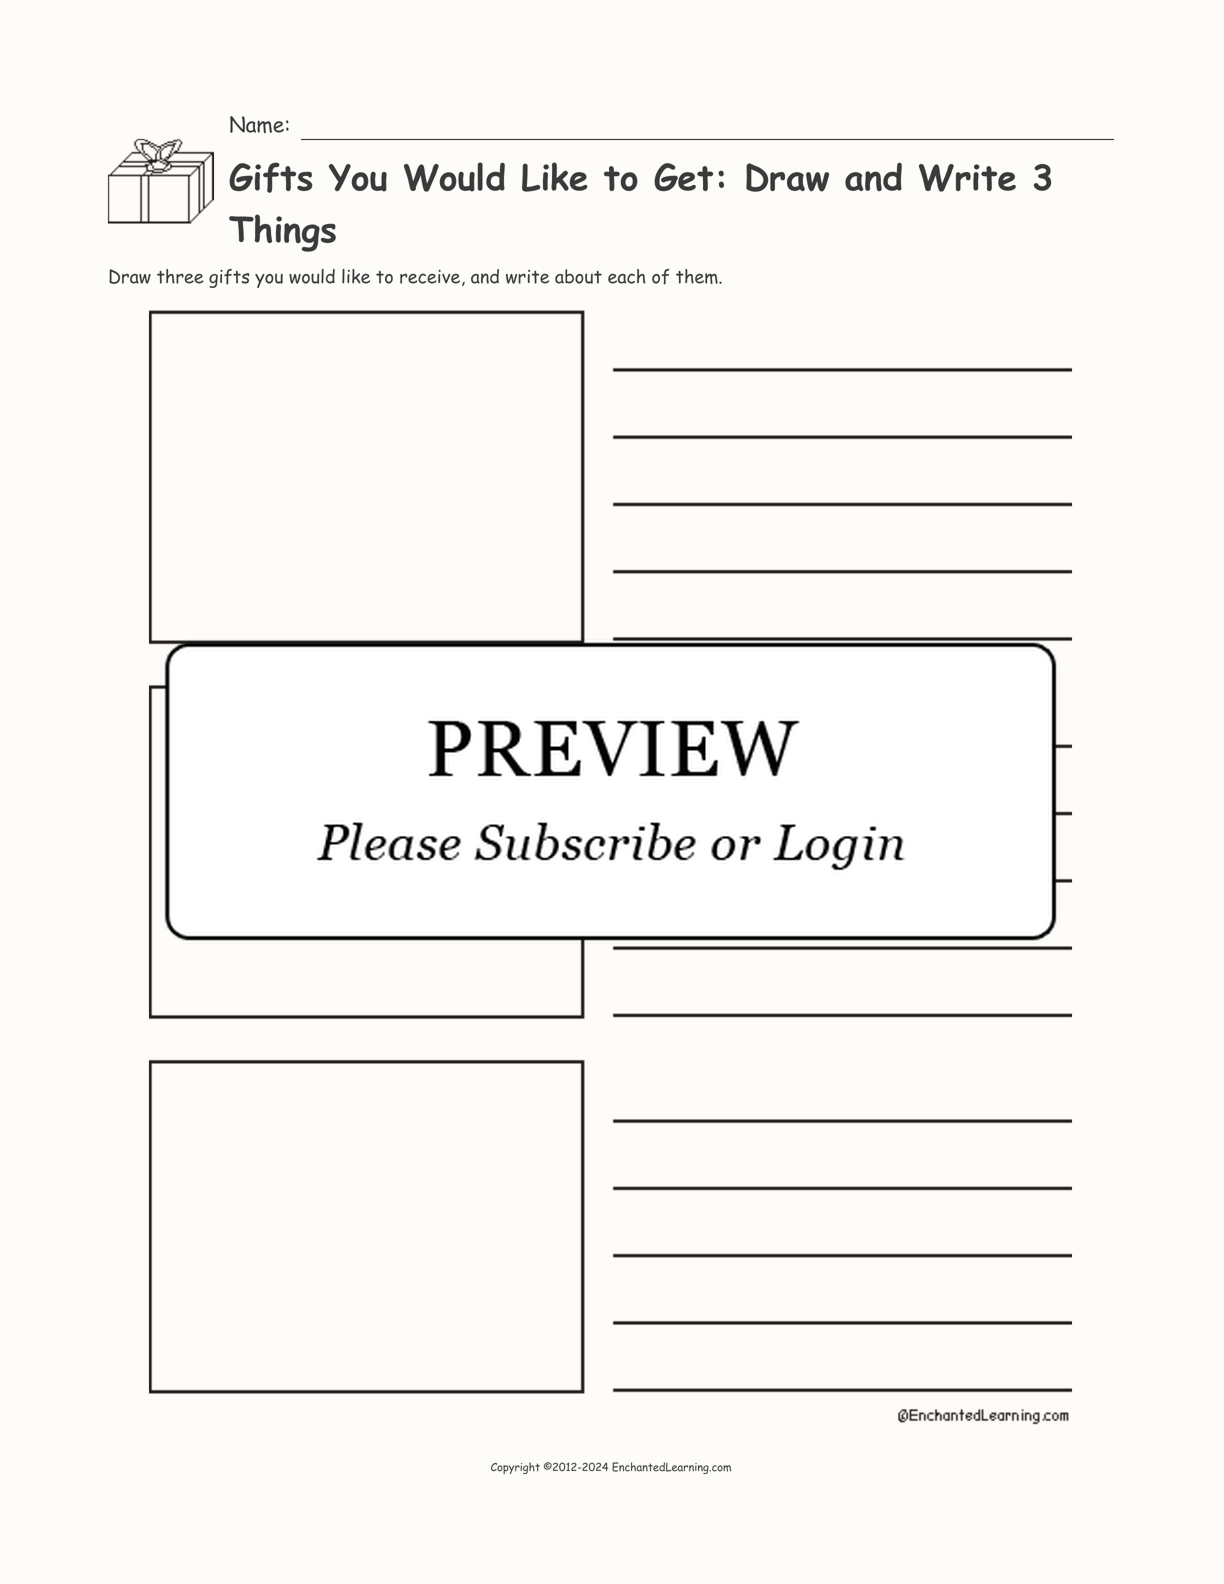 Gifts You Would Like to Get: Draw and Write 3 Things interactive printout page 1